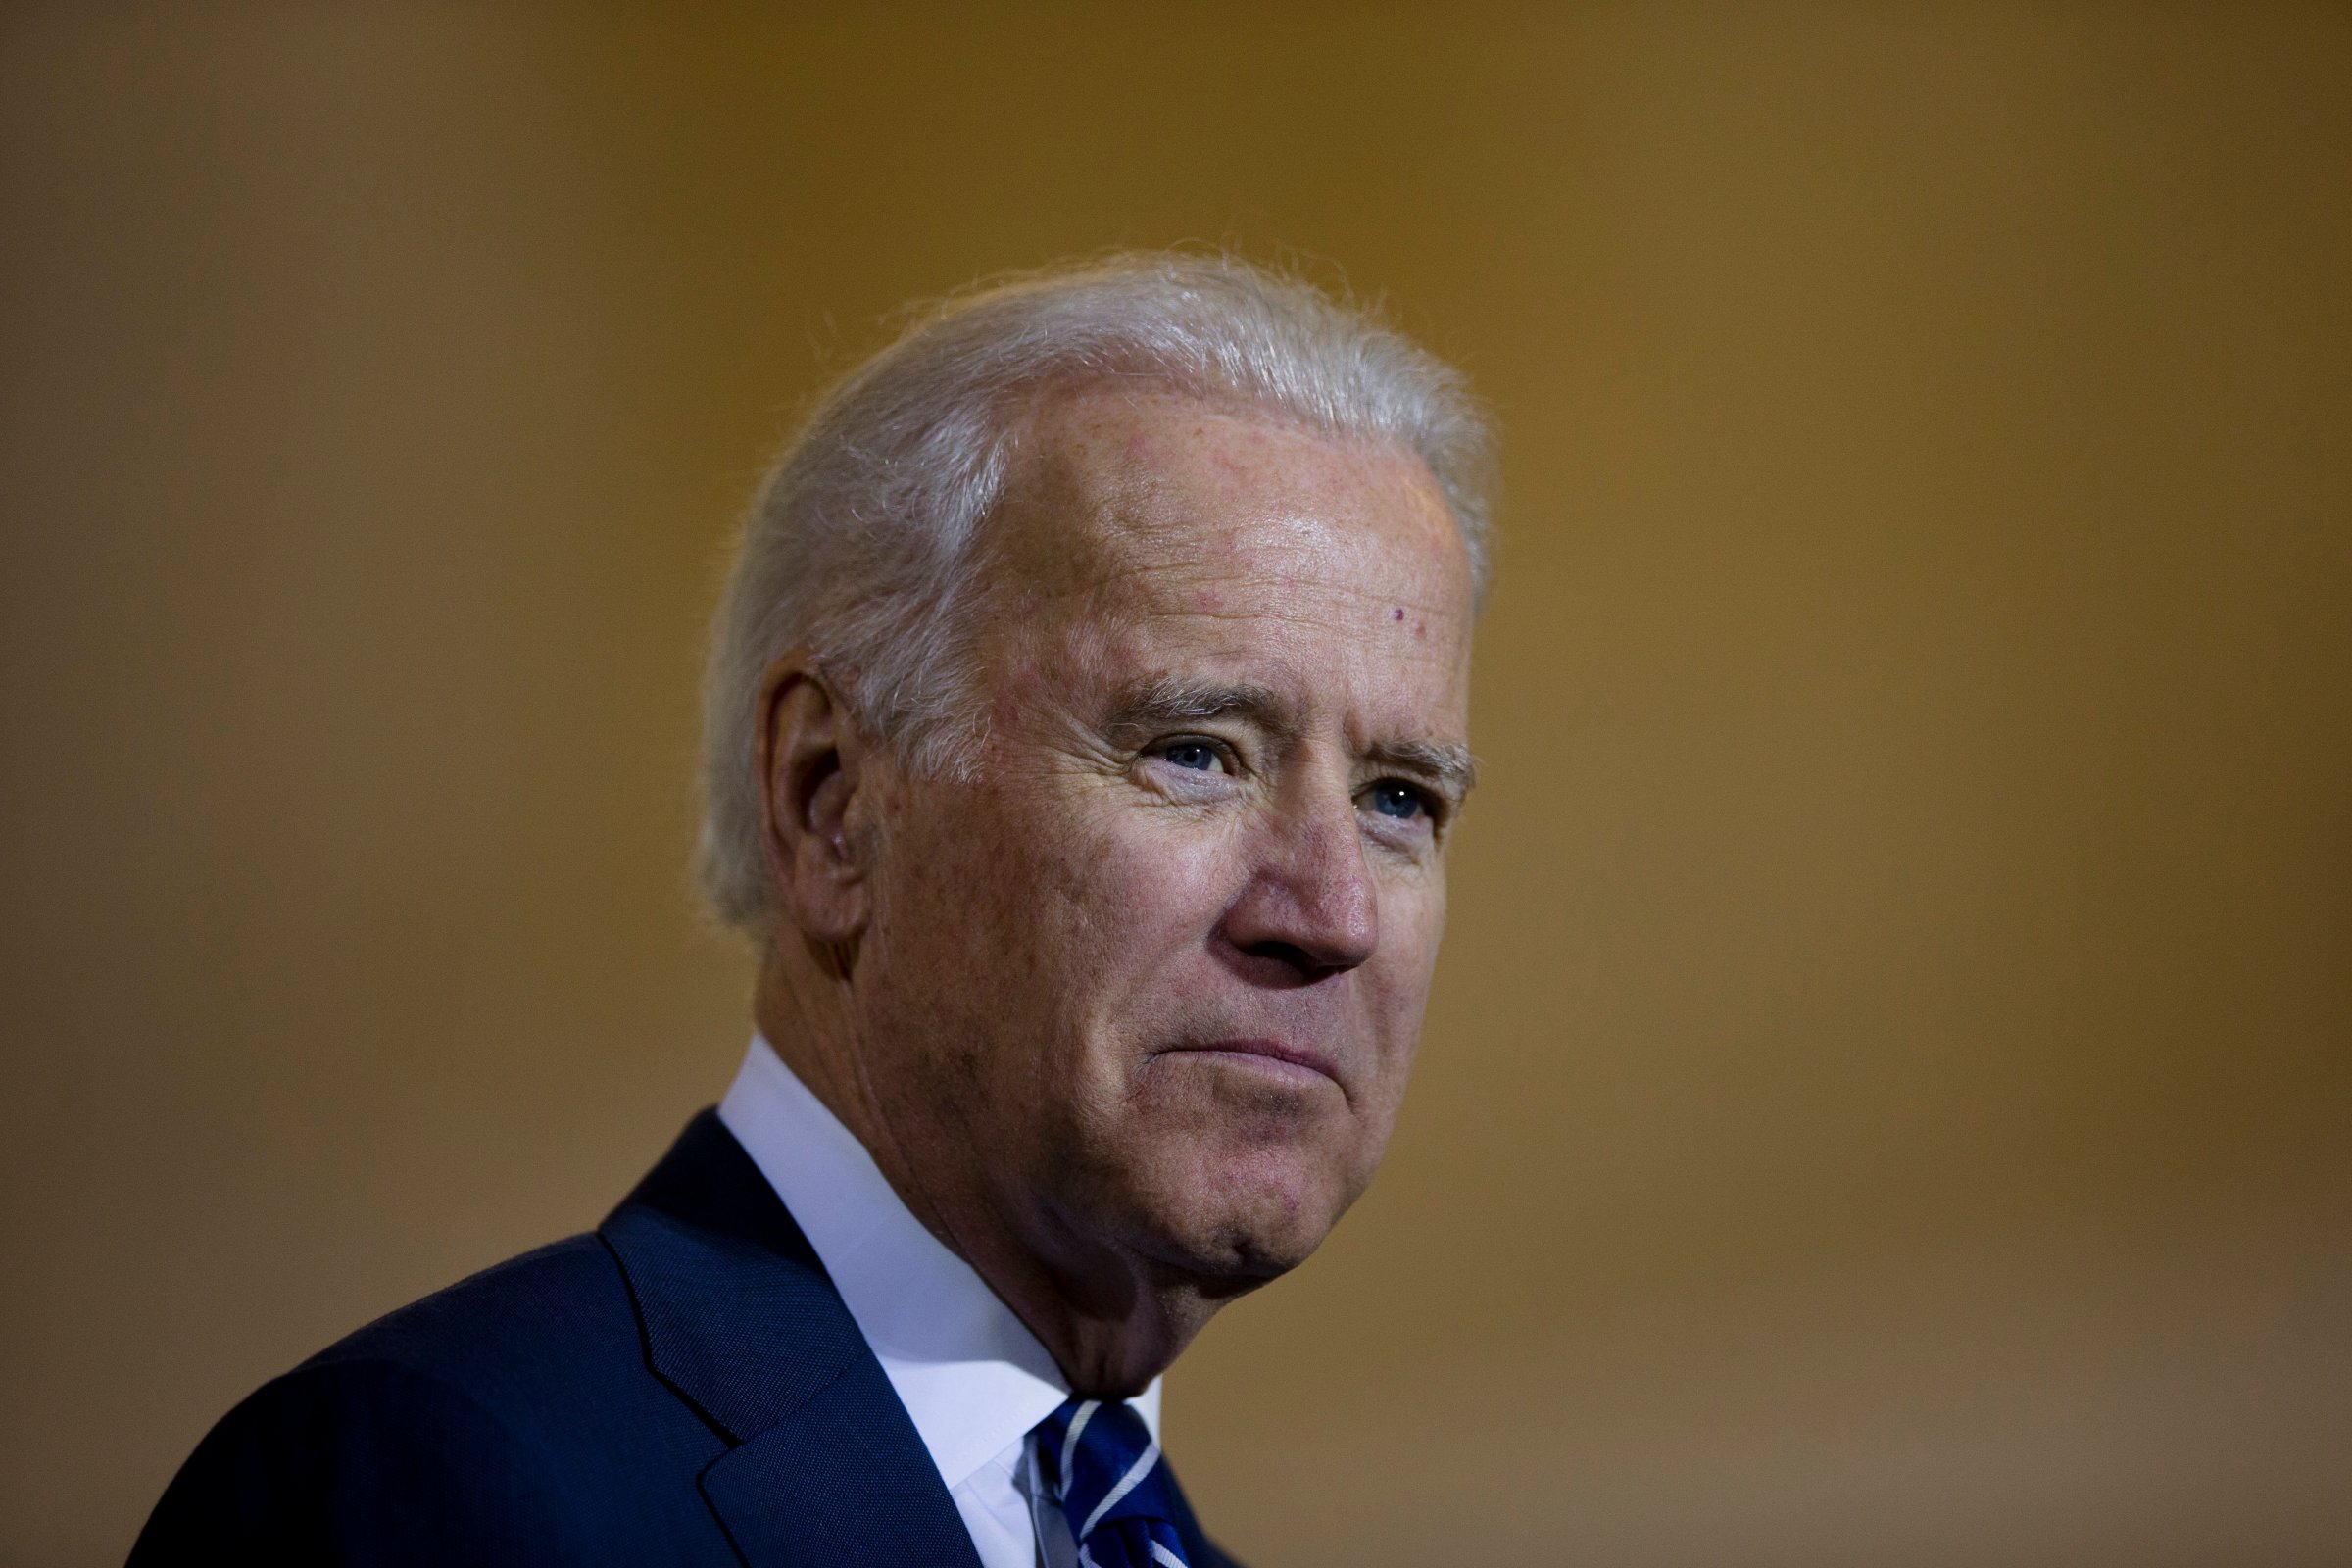 Vice President Joe Biden listens to remarks at a news conference, Feb. 6, 2014, at 30th Street Station in Philadelphia.